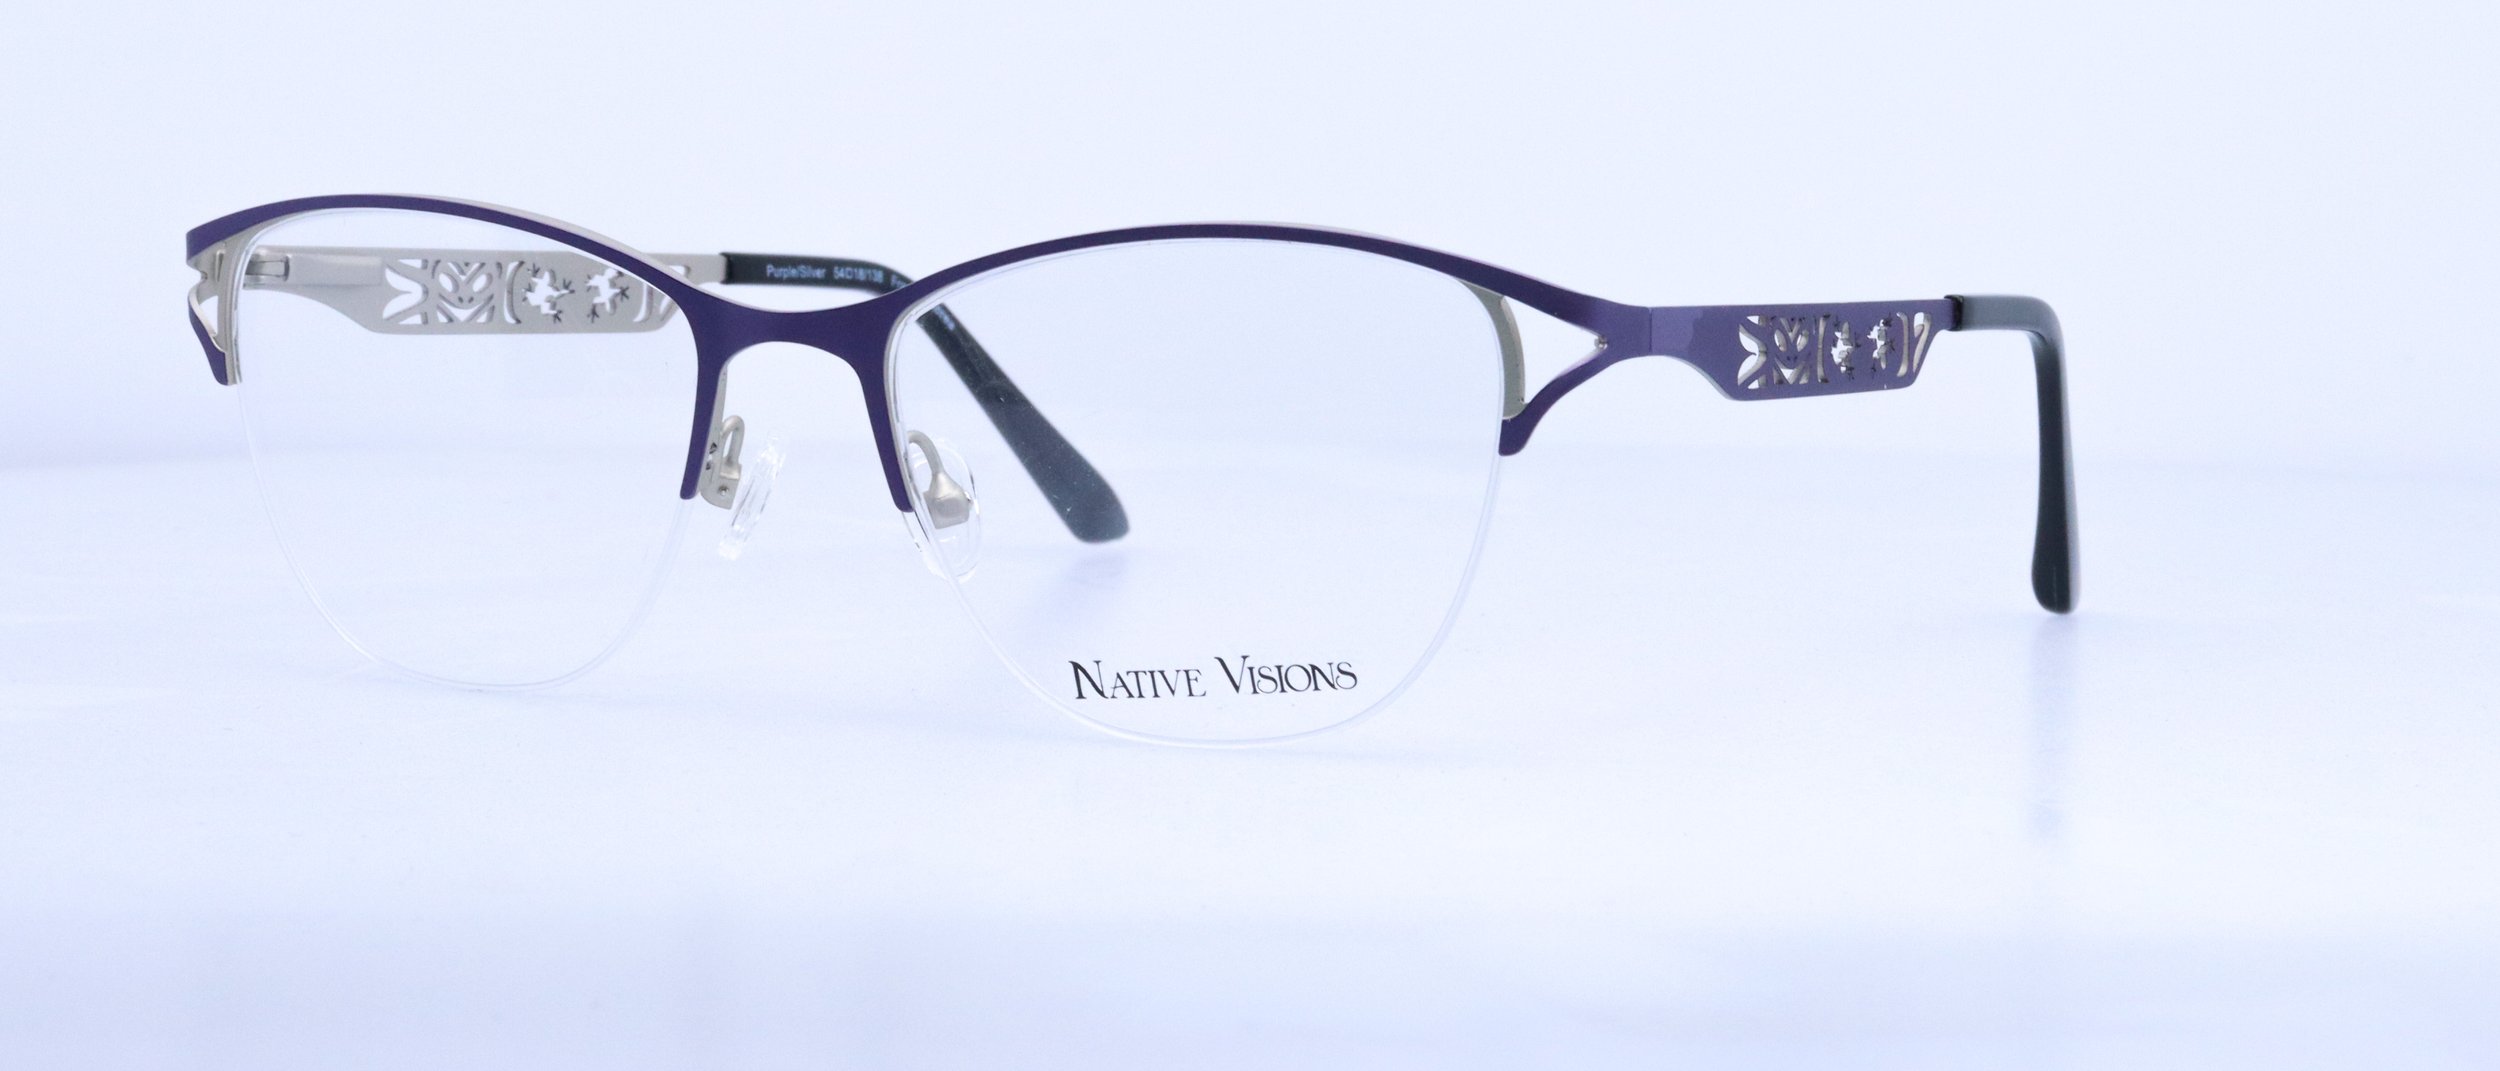  NEW!! Frog 2: 54-18-138, Available in Black/Teal or Purple/Silver 